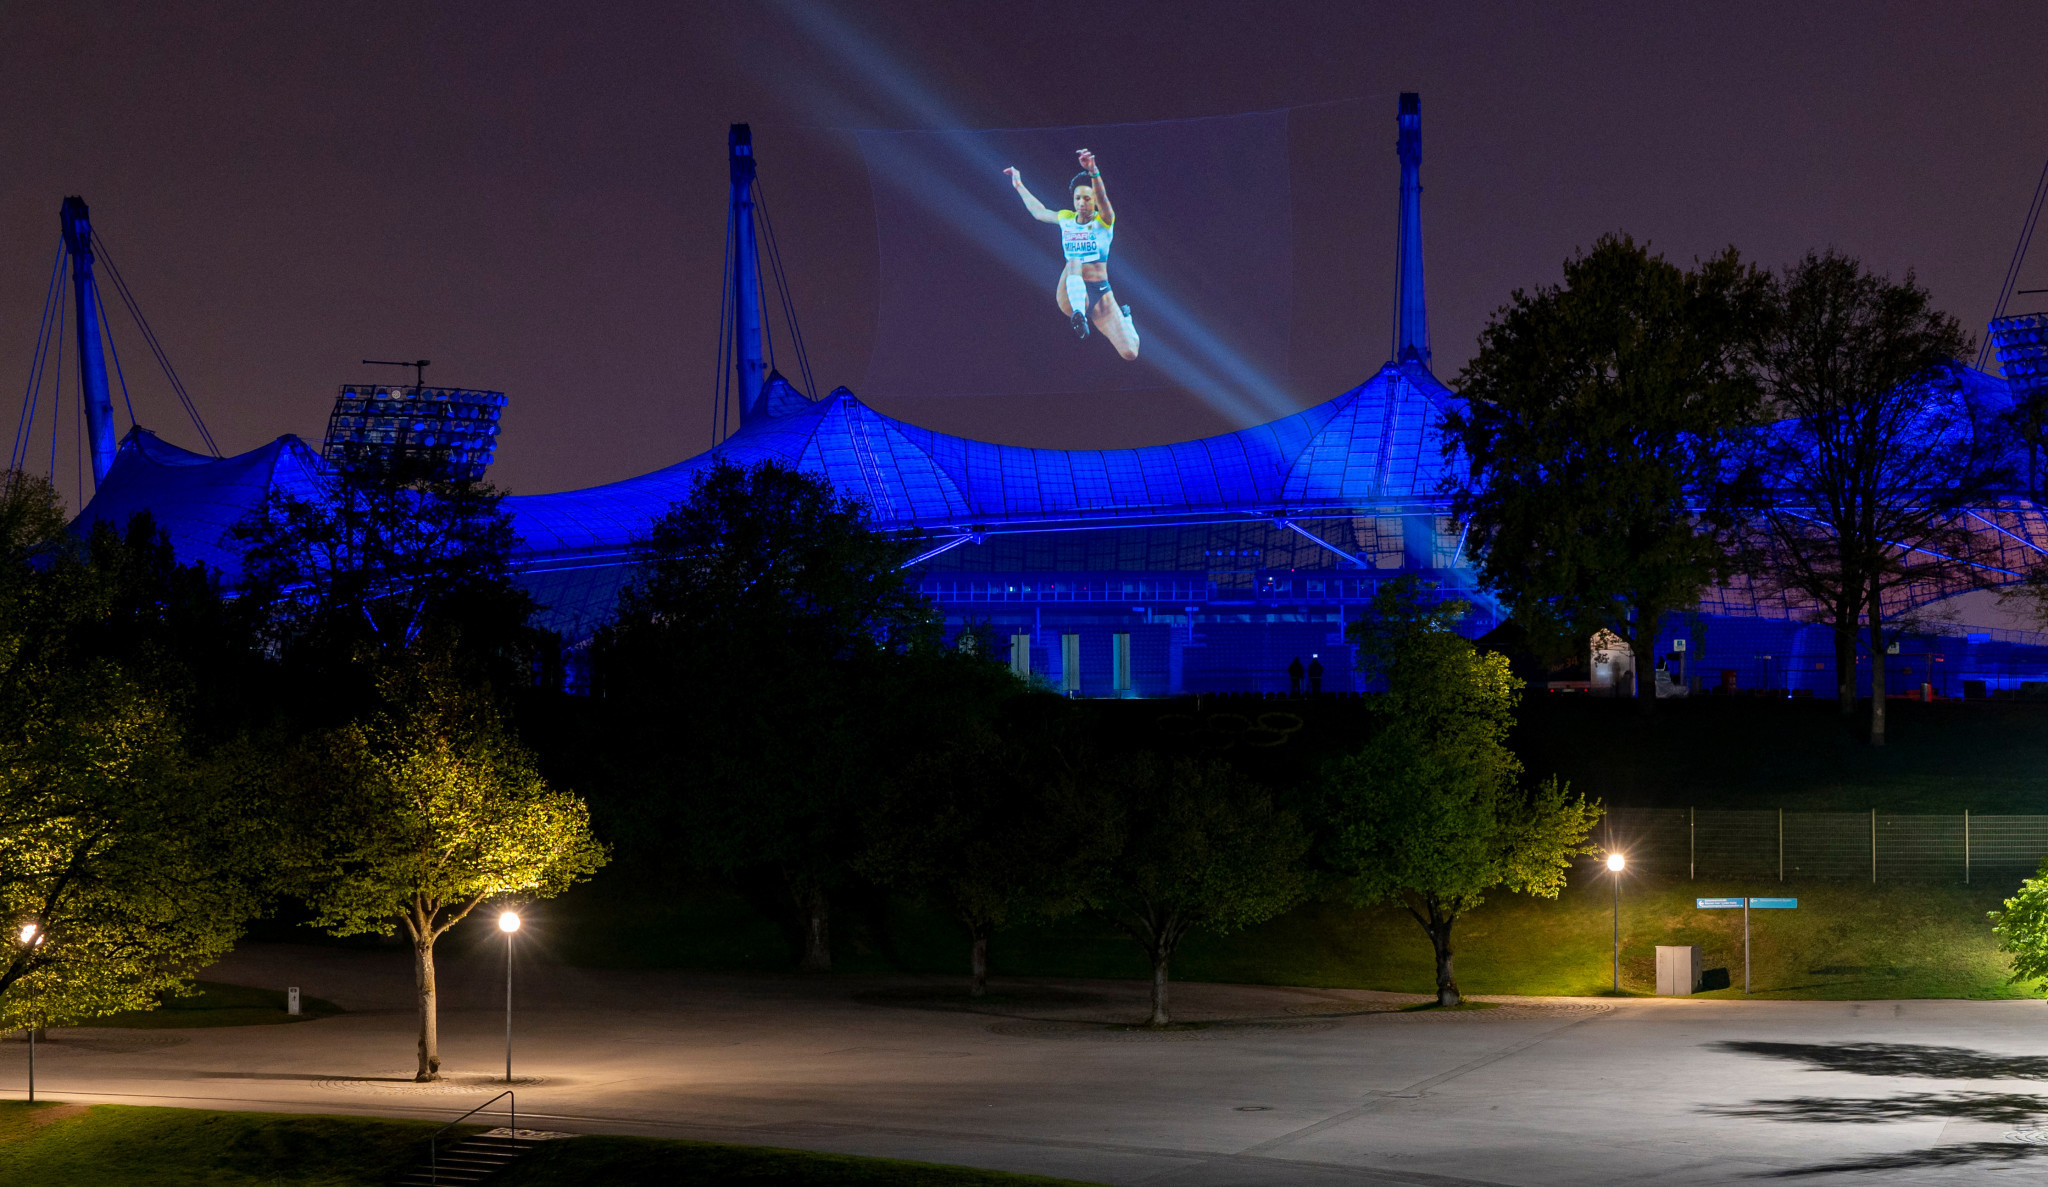 Germany's women's long jump Olympic champion Malaika Mihambo was among the athletes projected above the Olympiastadion ©Marc Mueller/Munich 2022